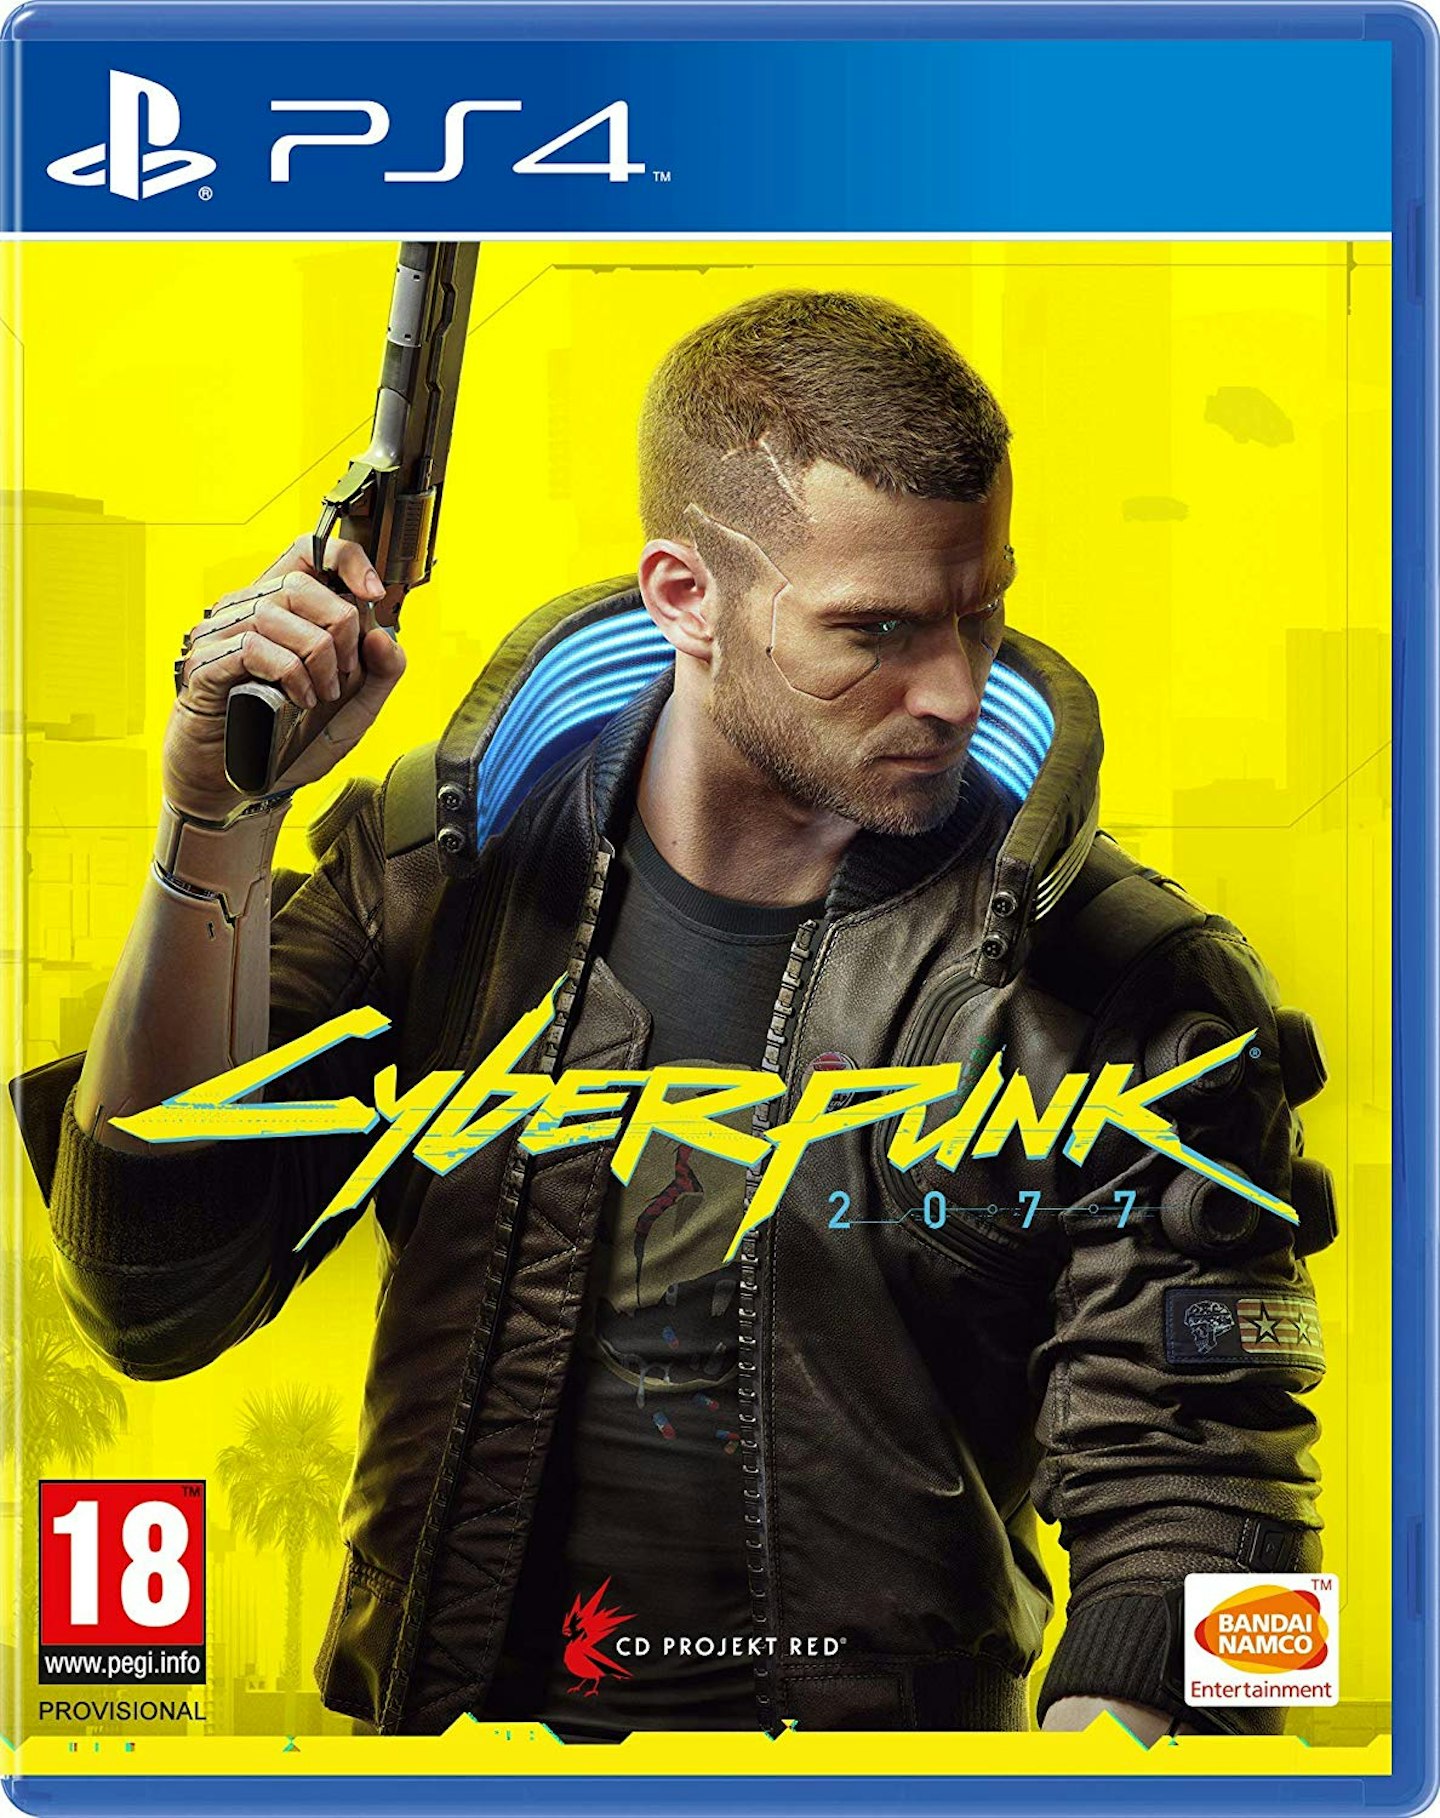 Cyberpunk 2077 with Limited Edition Steelbook, pre-order £49.99